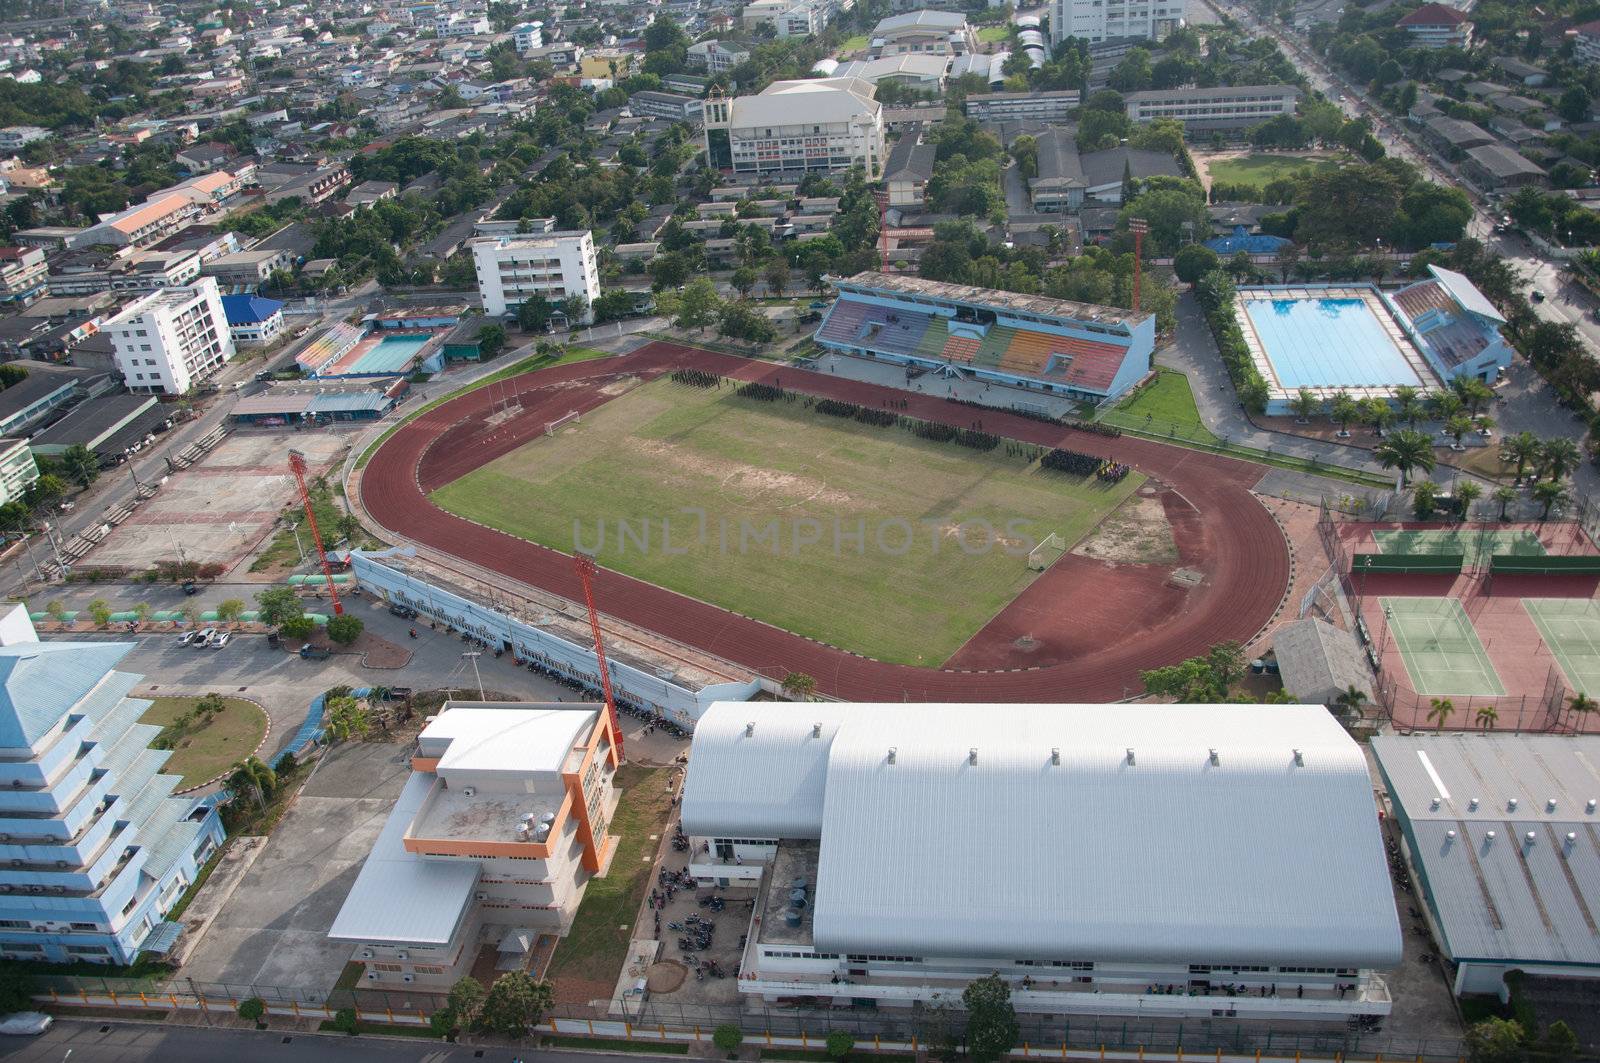 yala sport field in yala, thailand - aerial view by ngarare